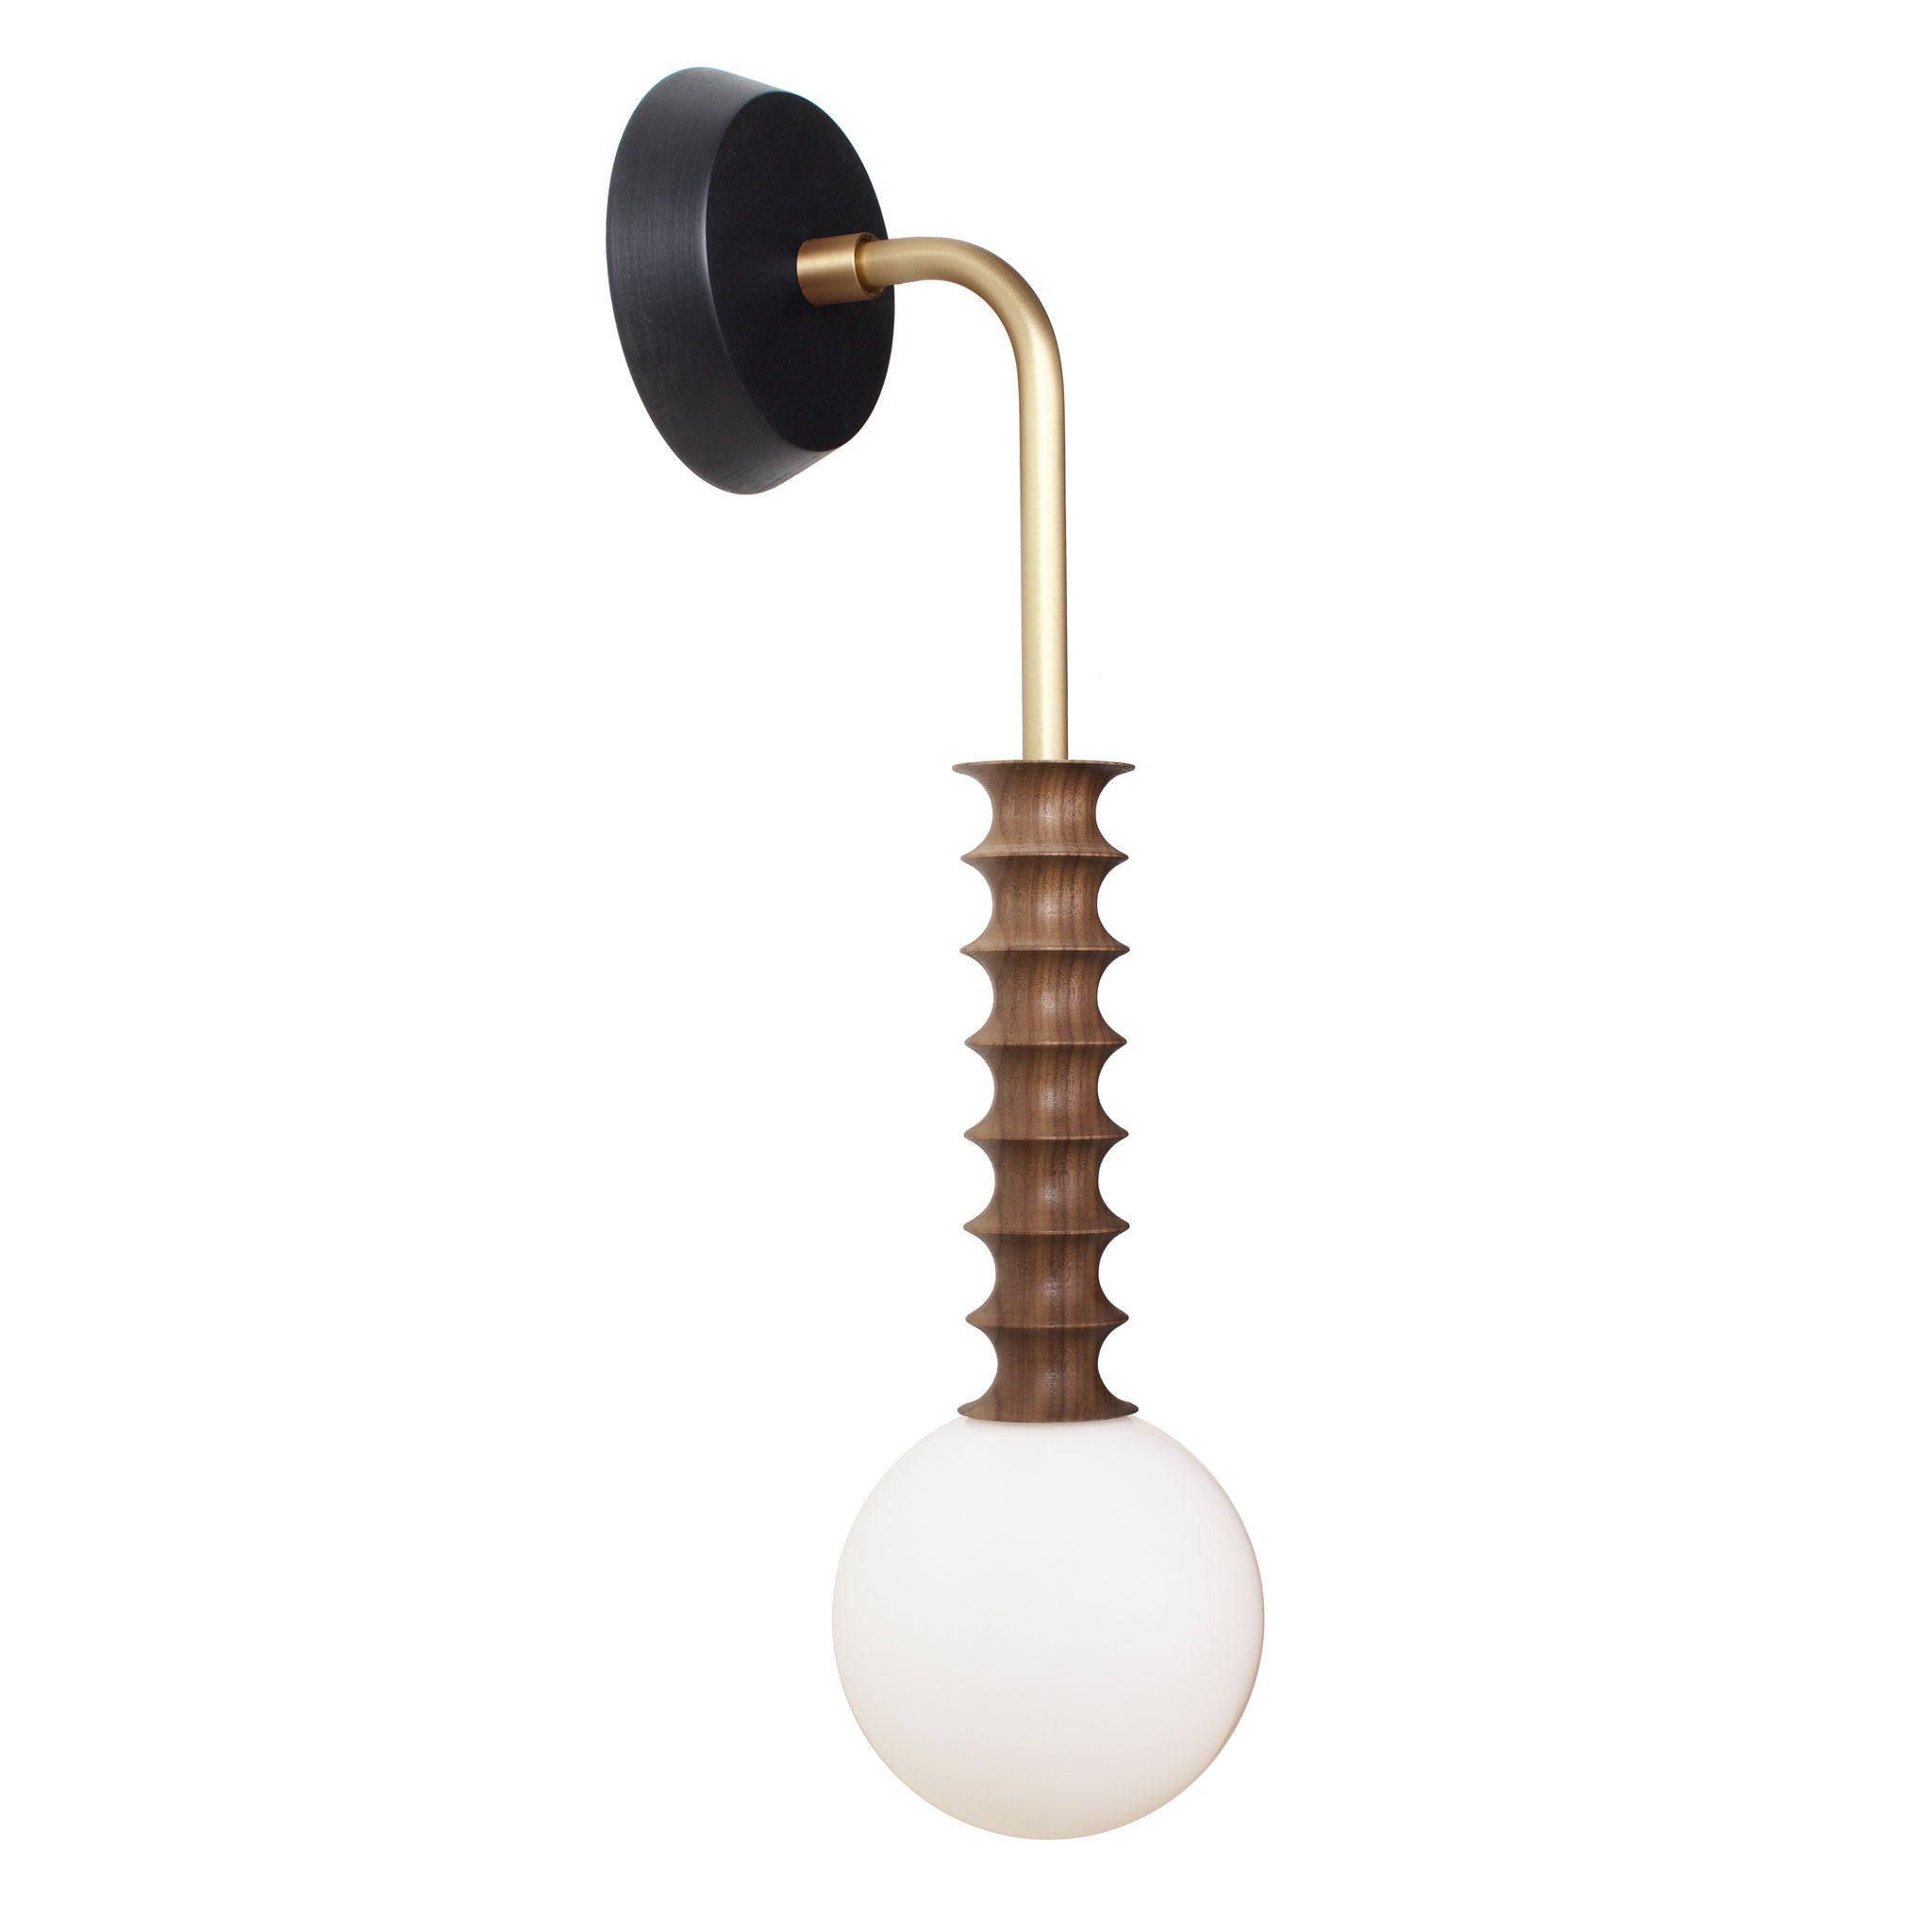 Loop Brass and Sphere Sconce LED Light - Modern Wall Lamp